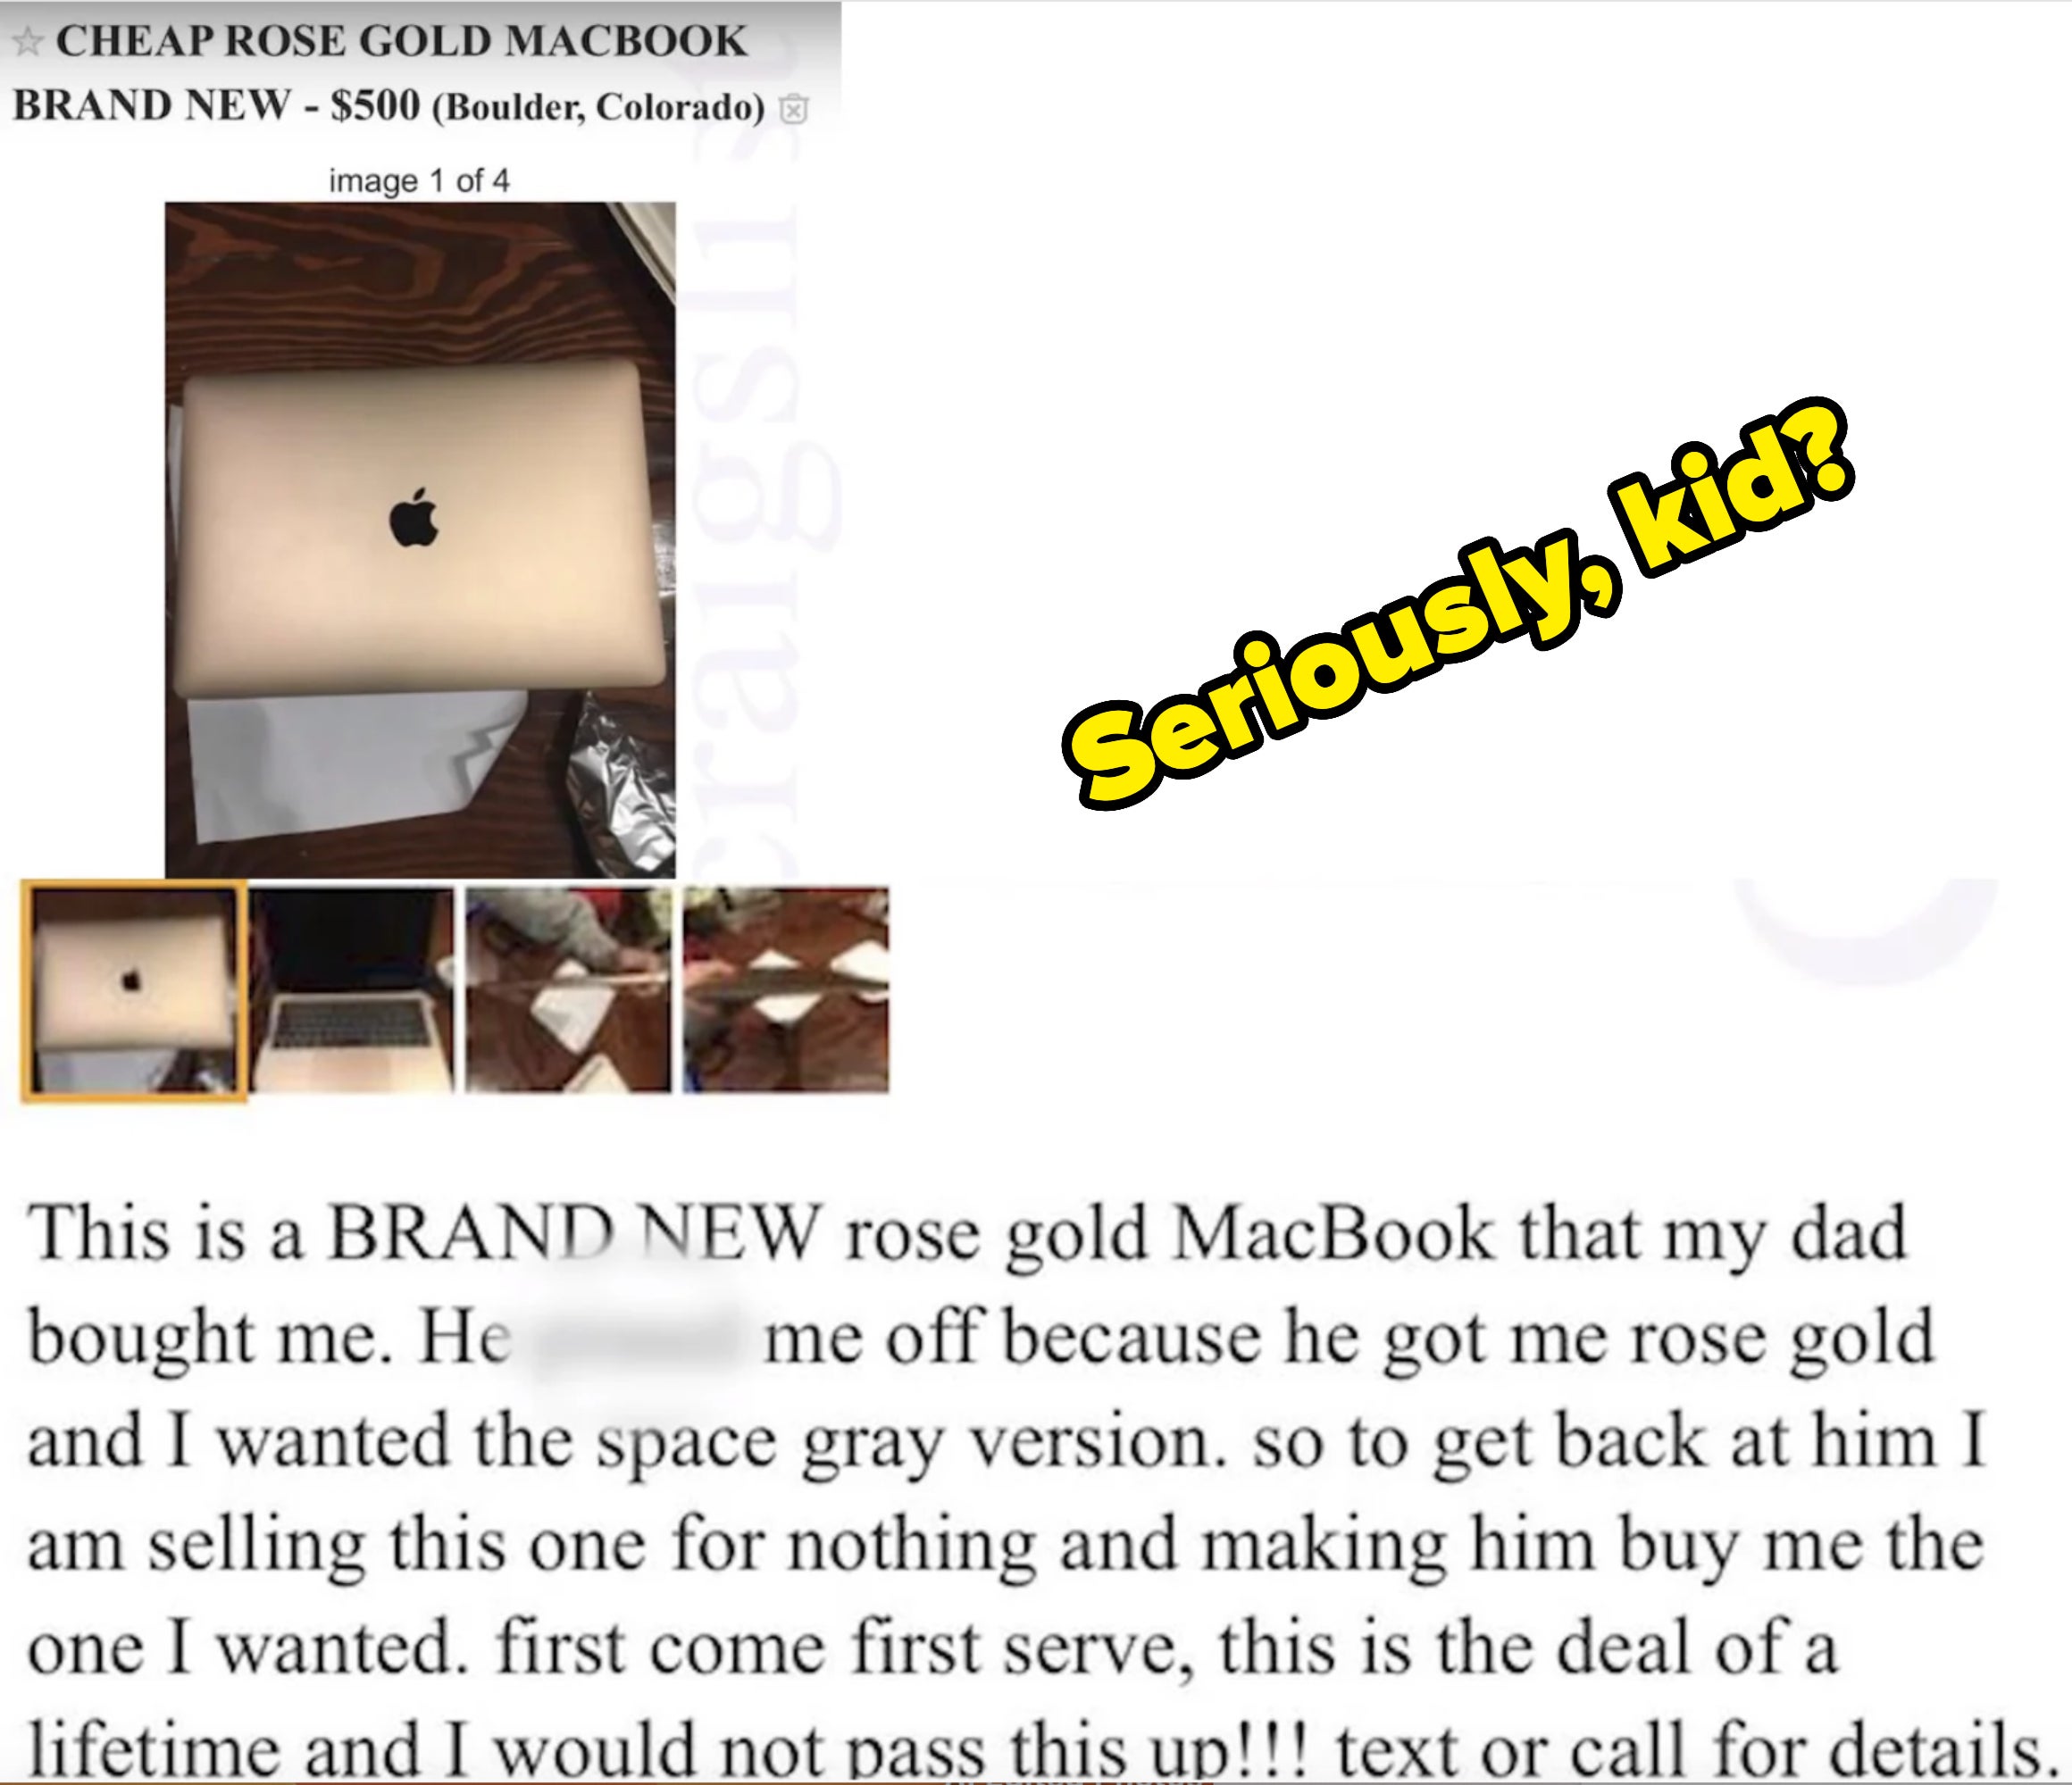 Classified ad with photos showing a new MacBook for sale by an individual disappointed with the color received as a gift